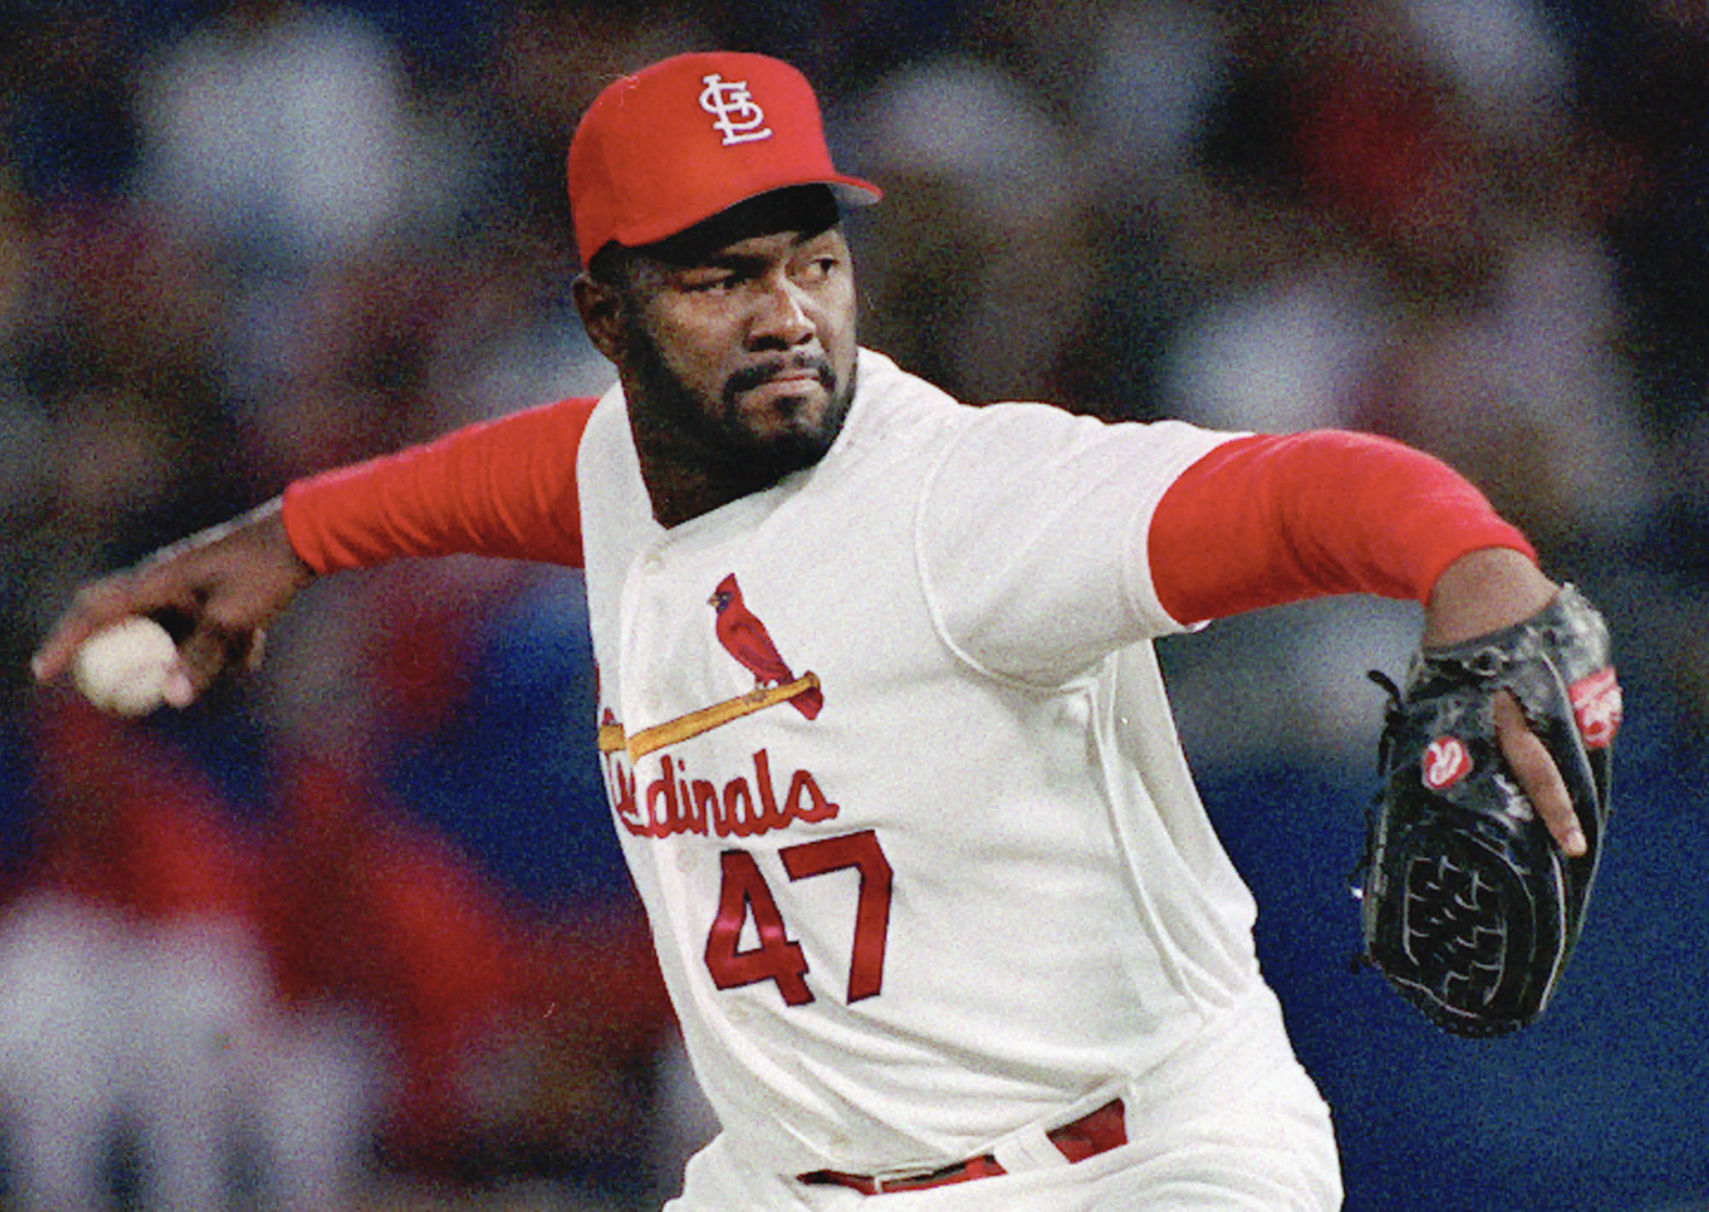 Former Cards closer Lee Smith, an early king of saves, elected to